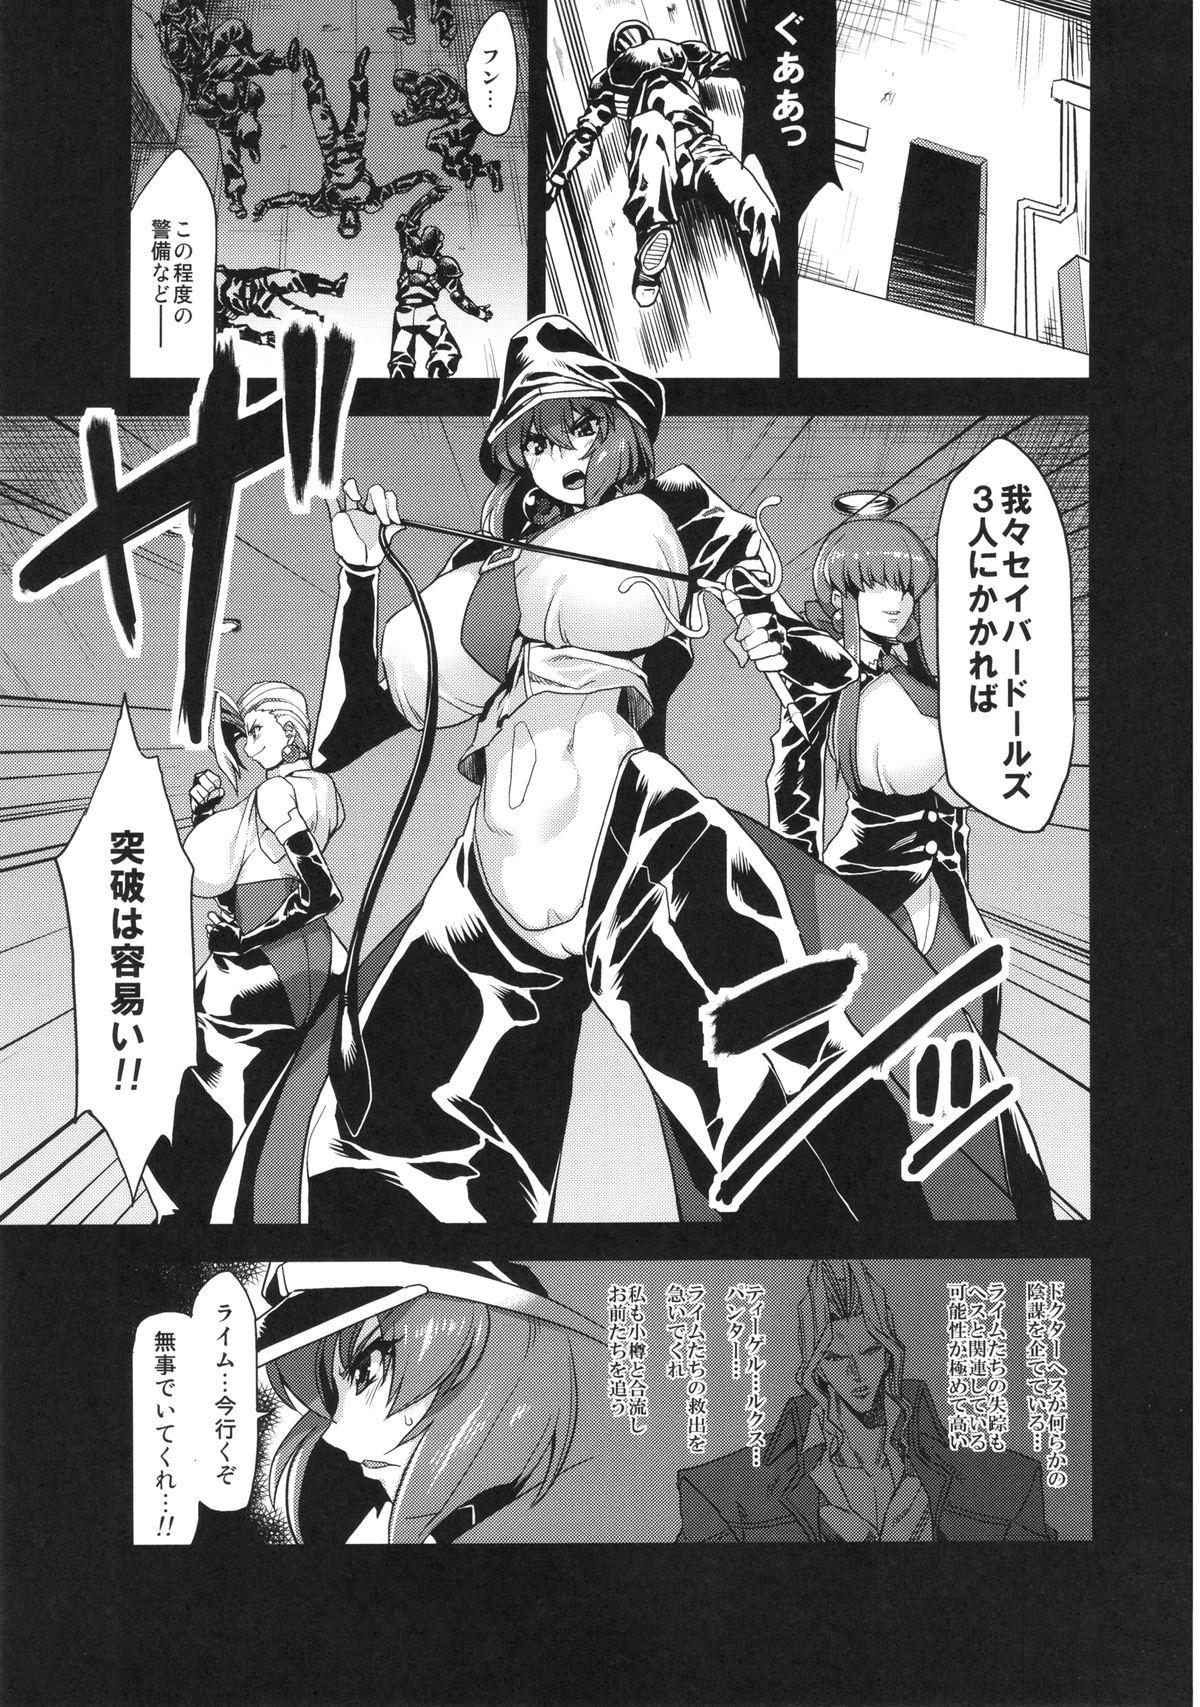 Blowjob Hentai Marionette 2 + OV - REQ - Saber marionette Old - Page 2